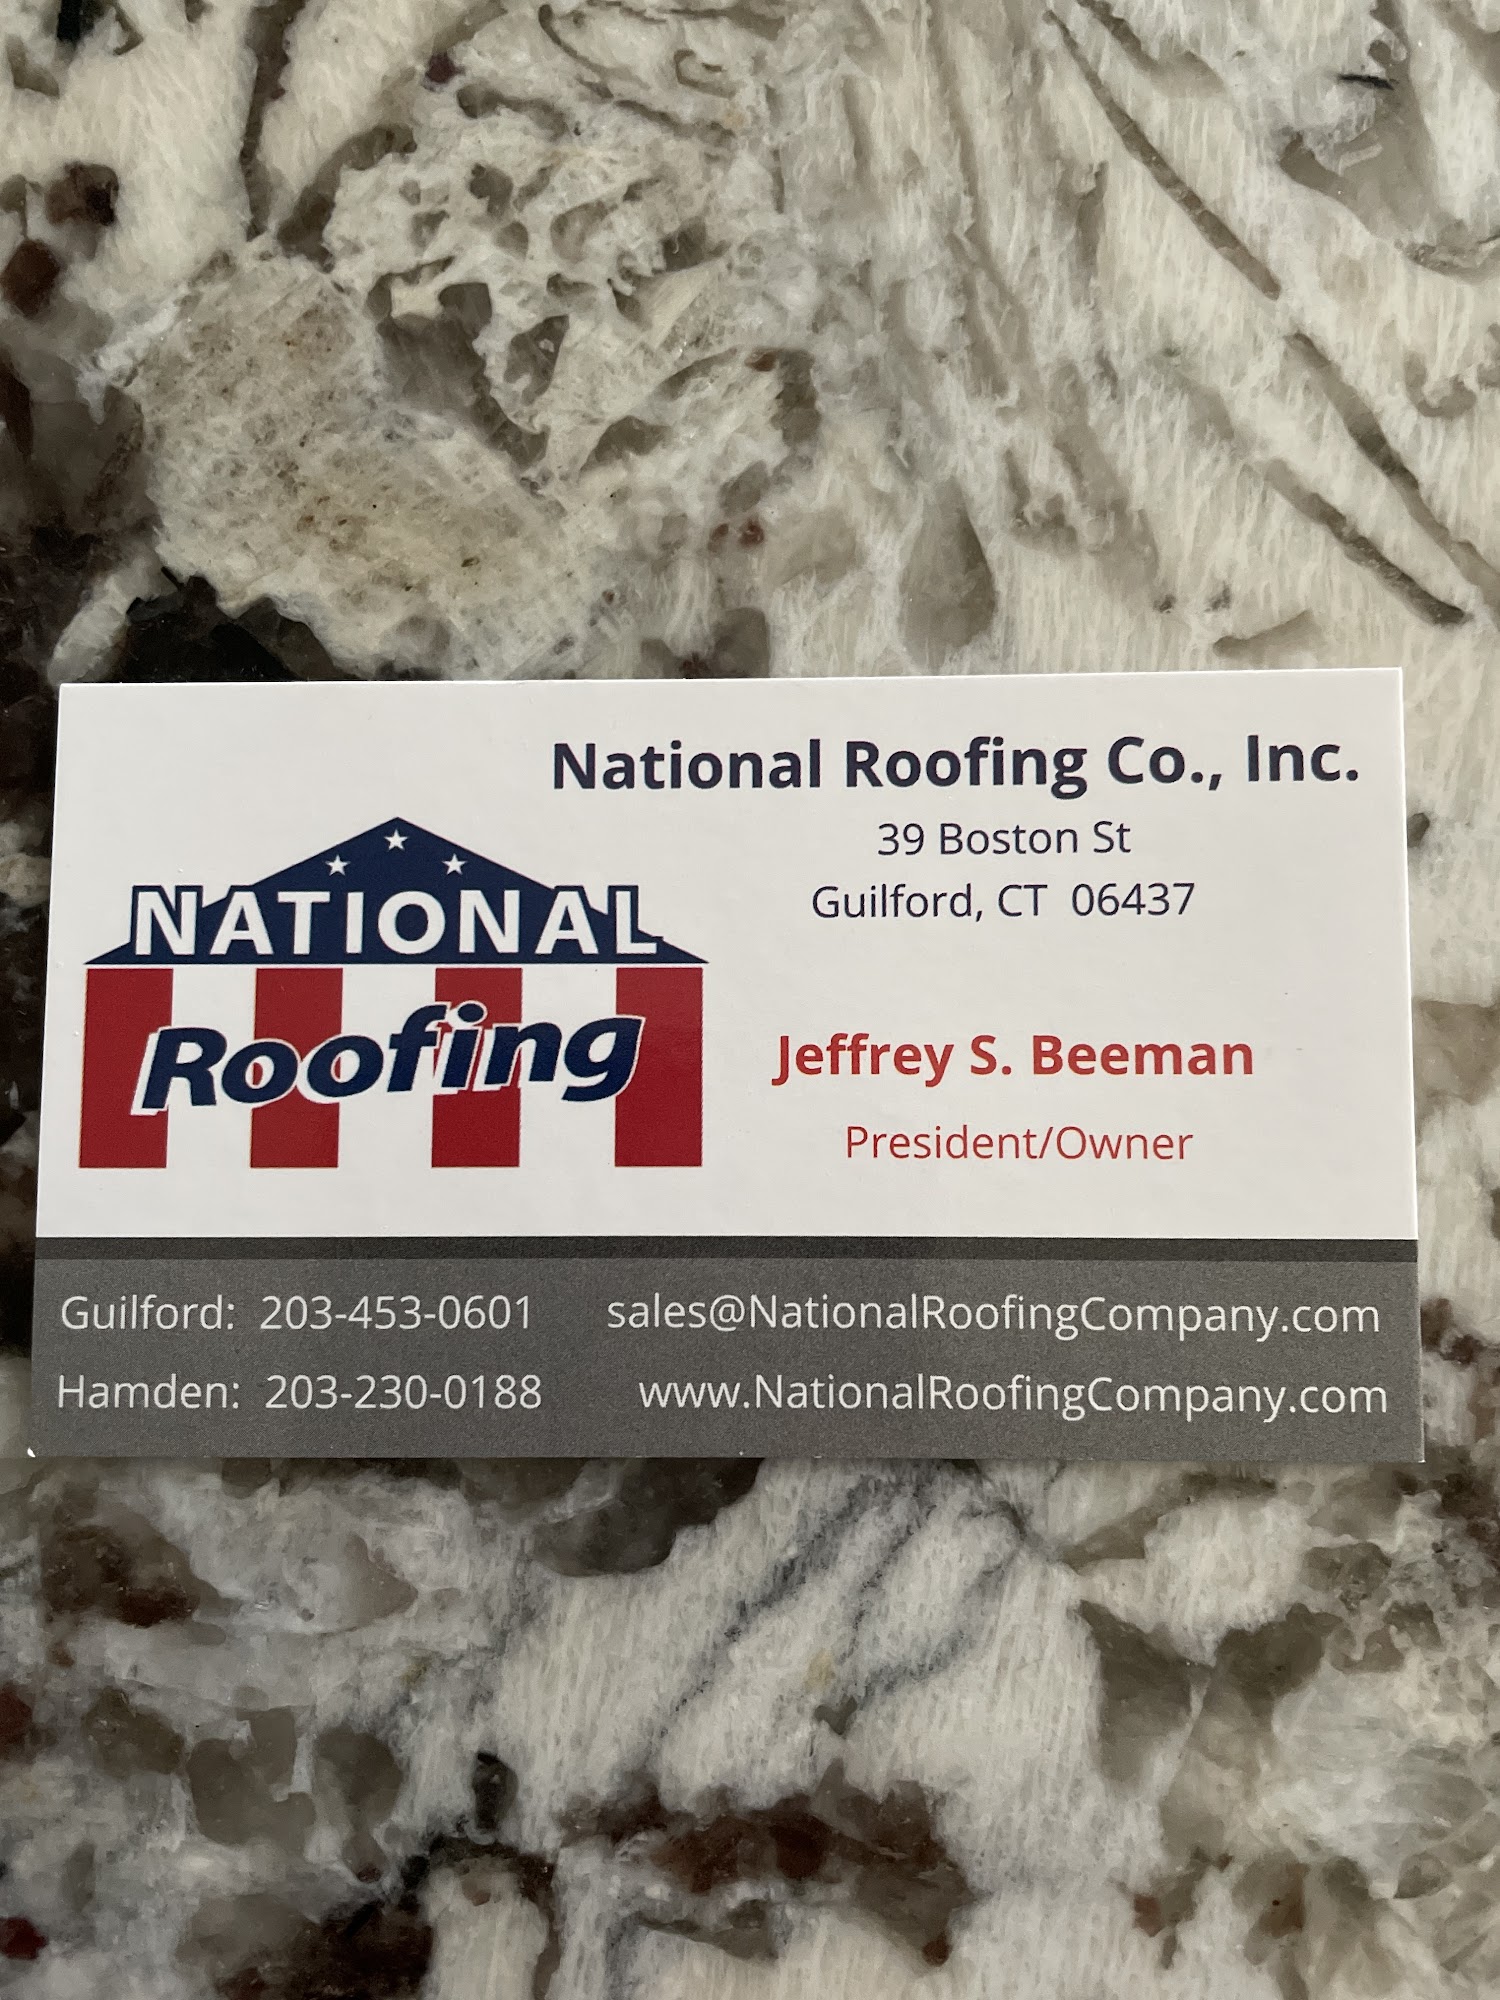 National Roofing Co., Inc.